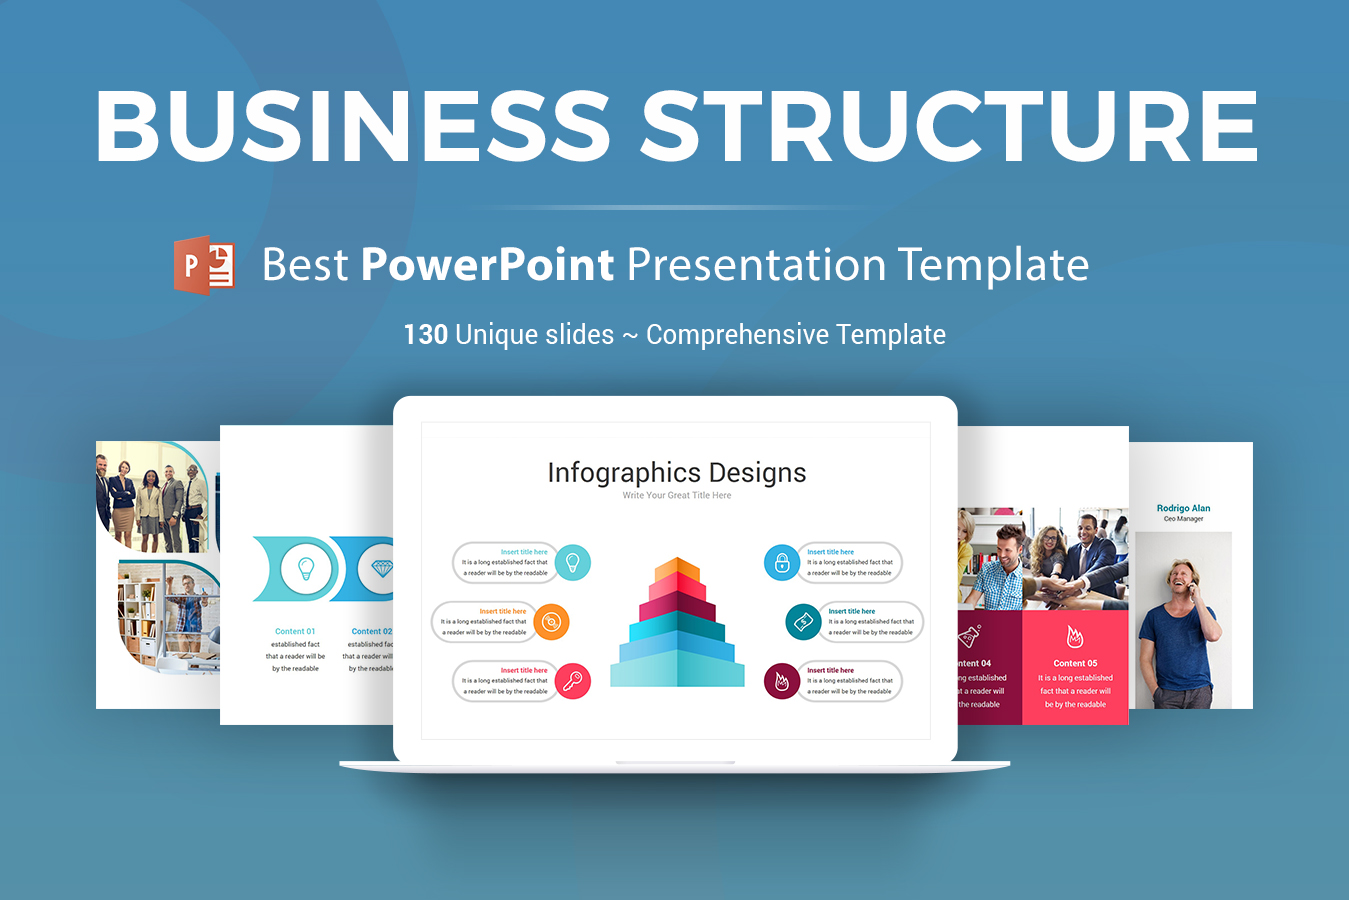 Business Structure PowerPoint template